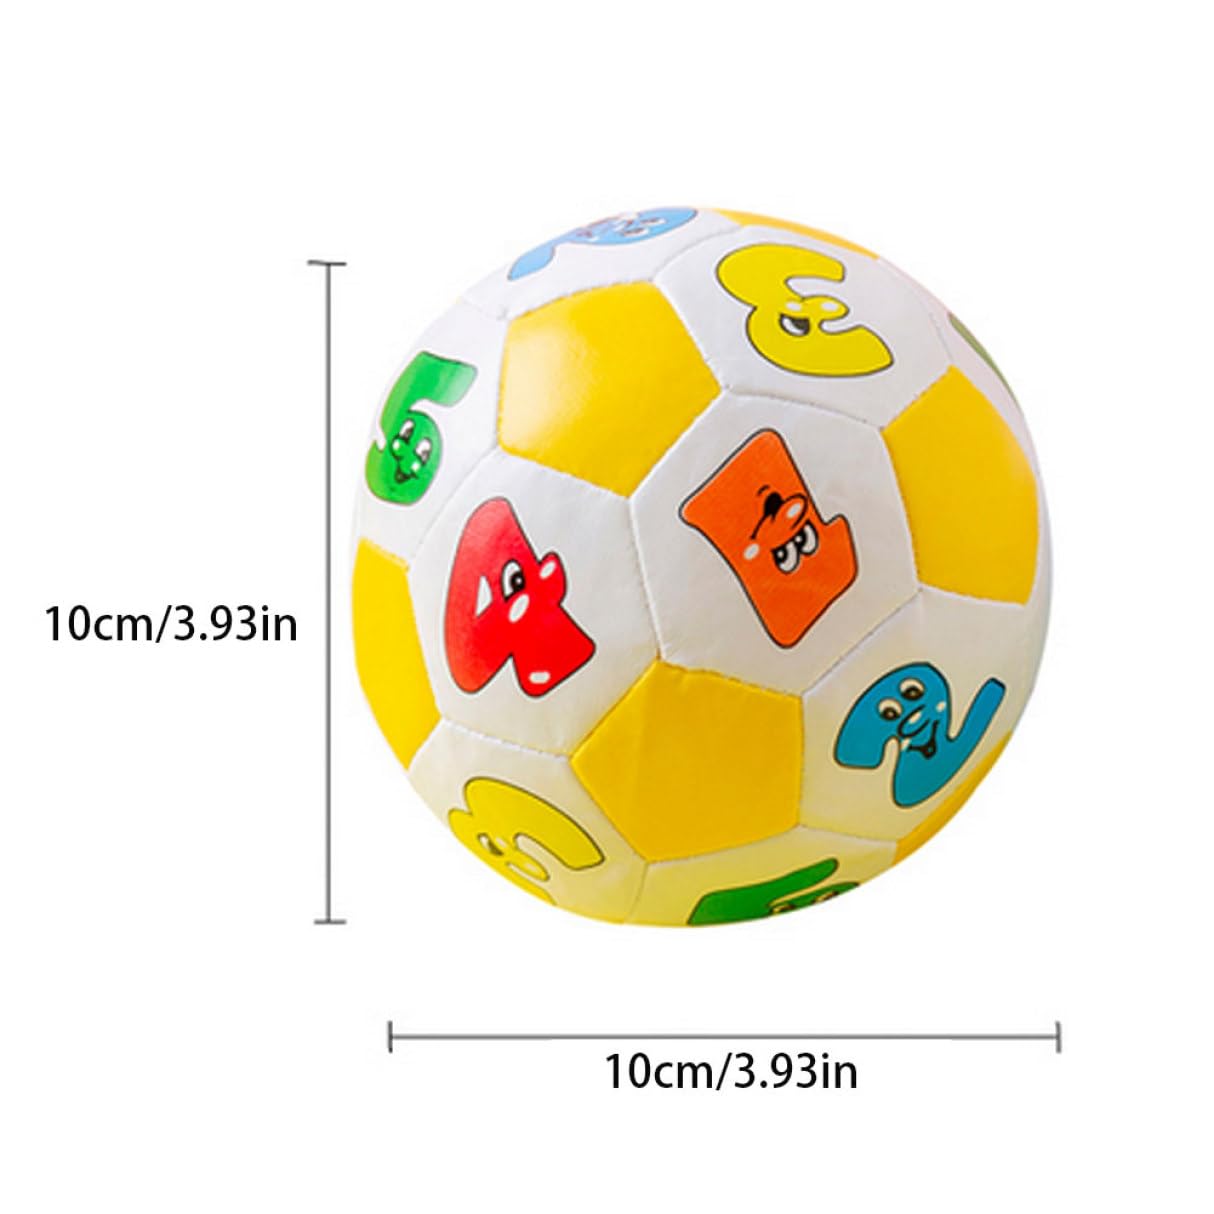 Comebachome Mini Soccer Ball, Mini Soft Ball Toy for Children Educational Toy Baby Learning Colors Number Rubber Ball, Kids Educational Toy